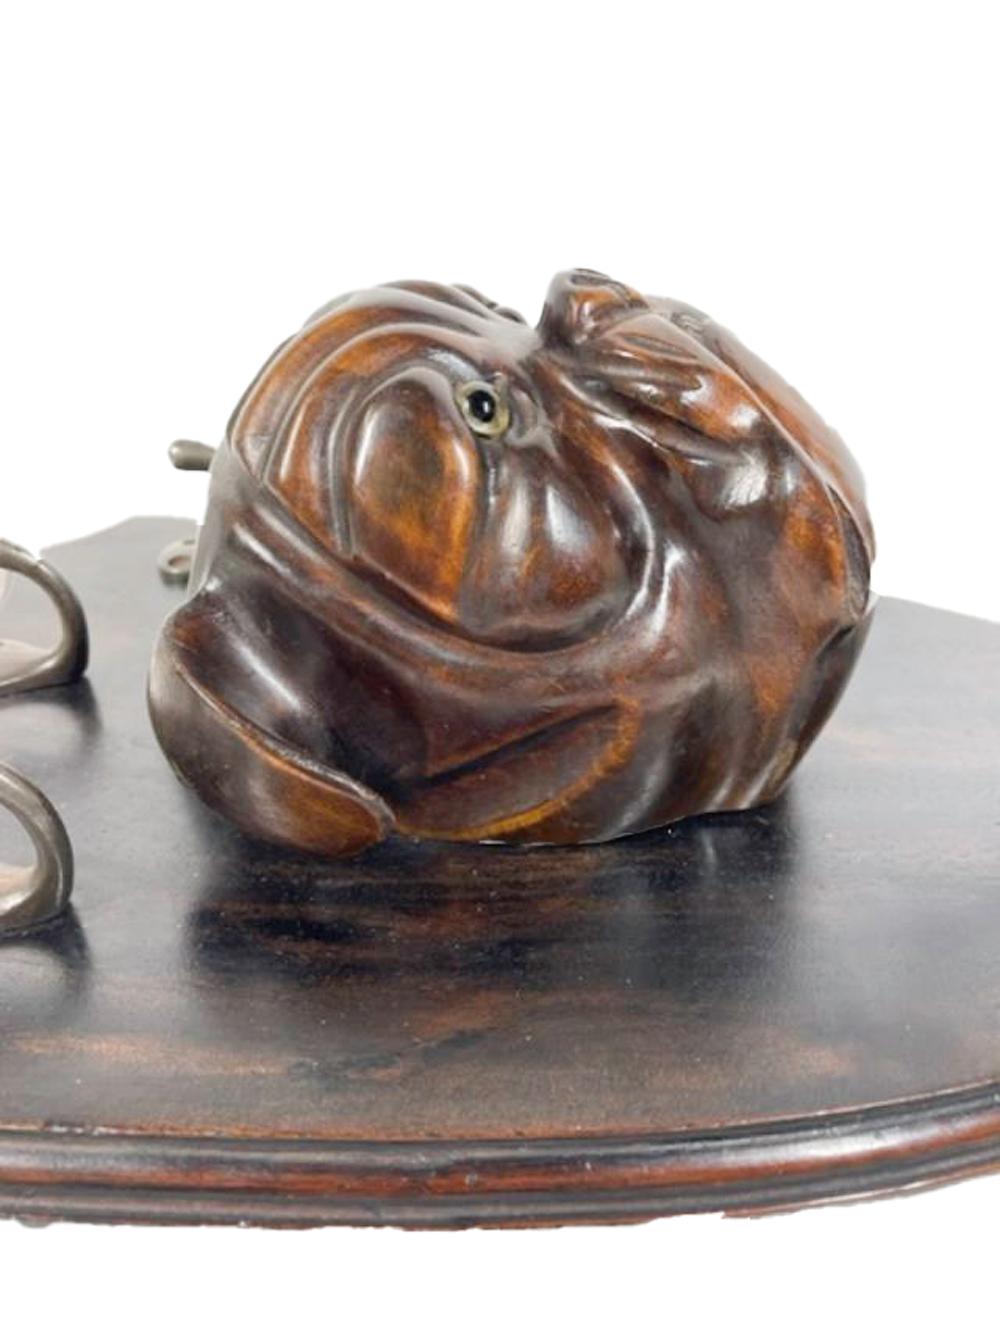 19th C Shield-Backed Lead/Leash Holder, Carved Wood Bulldog Head with Glass Eyes For Sale 2